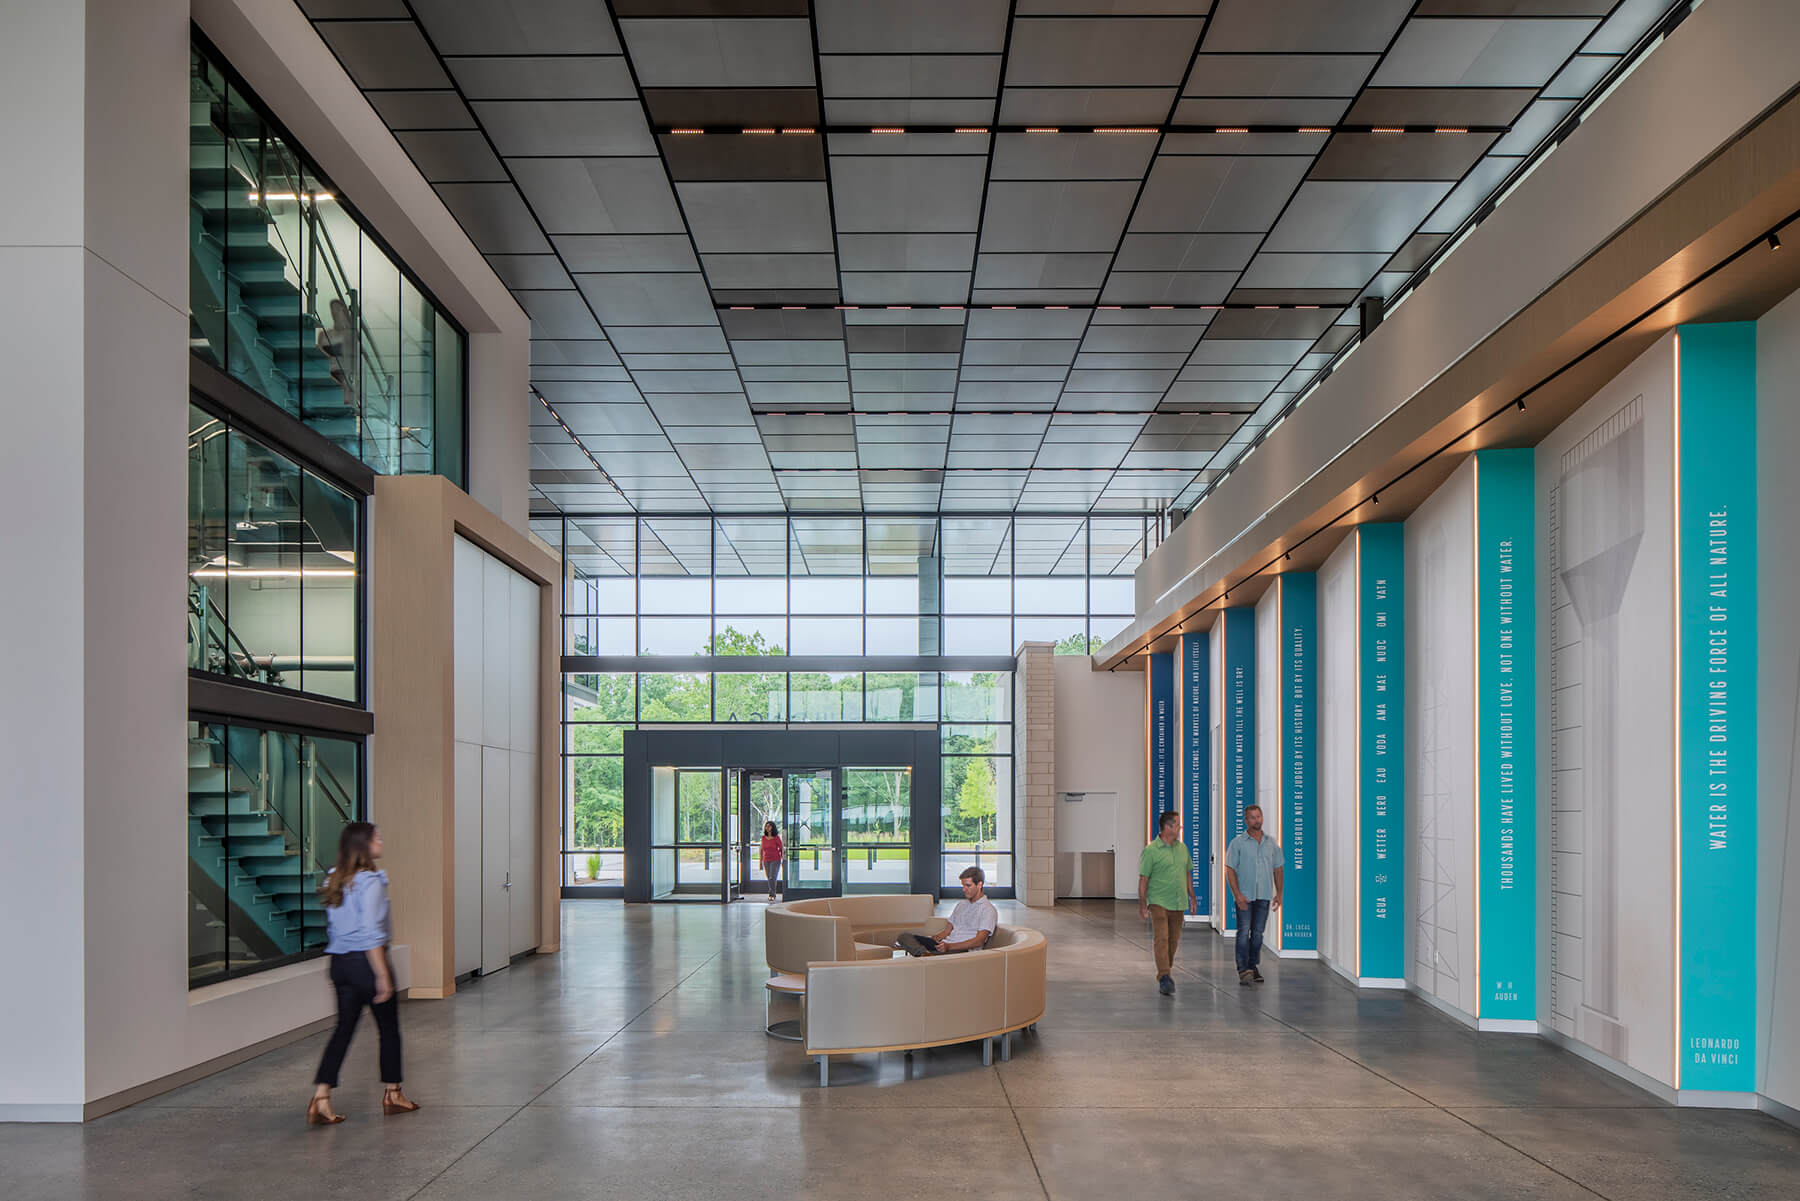 Lobby area of The Water Tower Global Innovation Hub featuring monumental stair